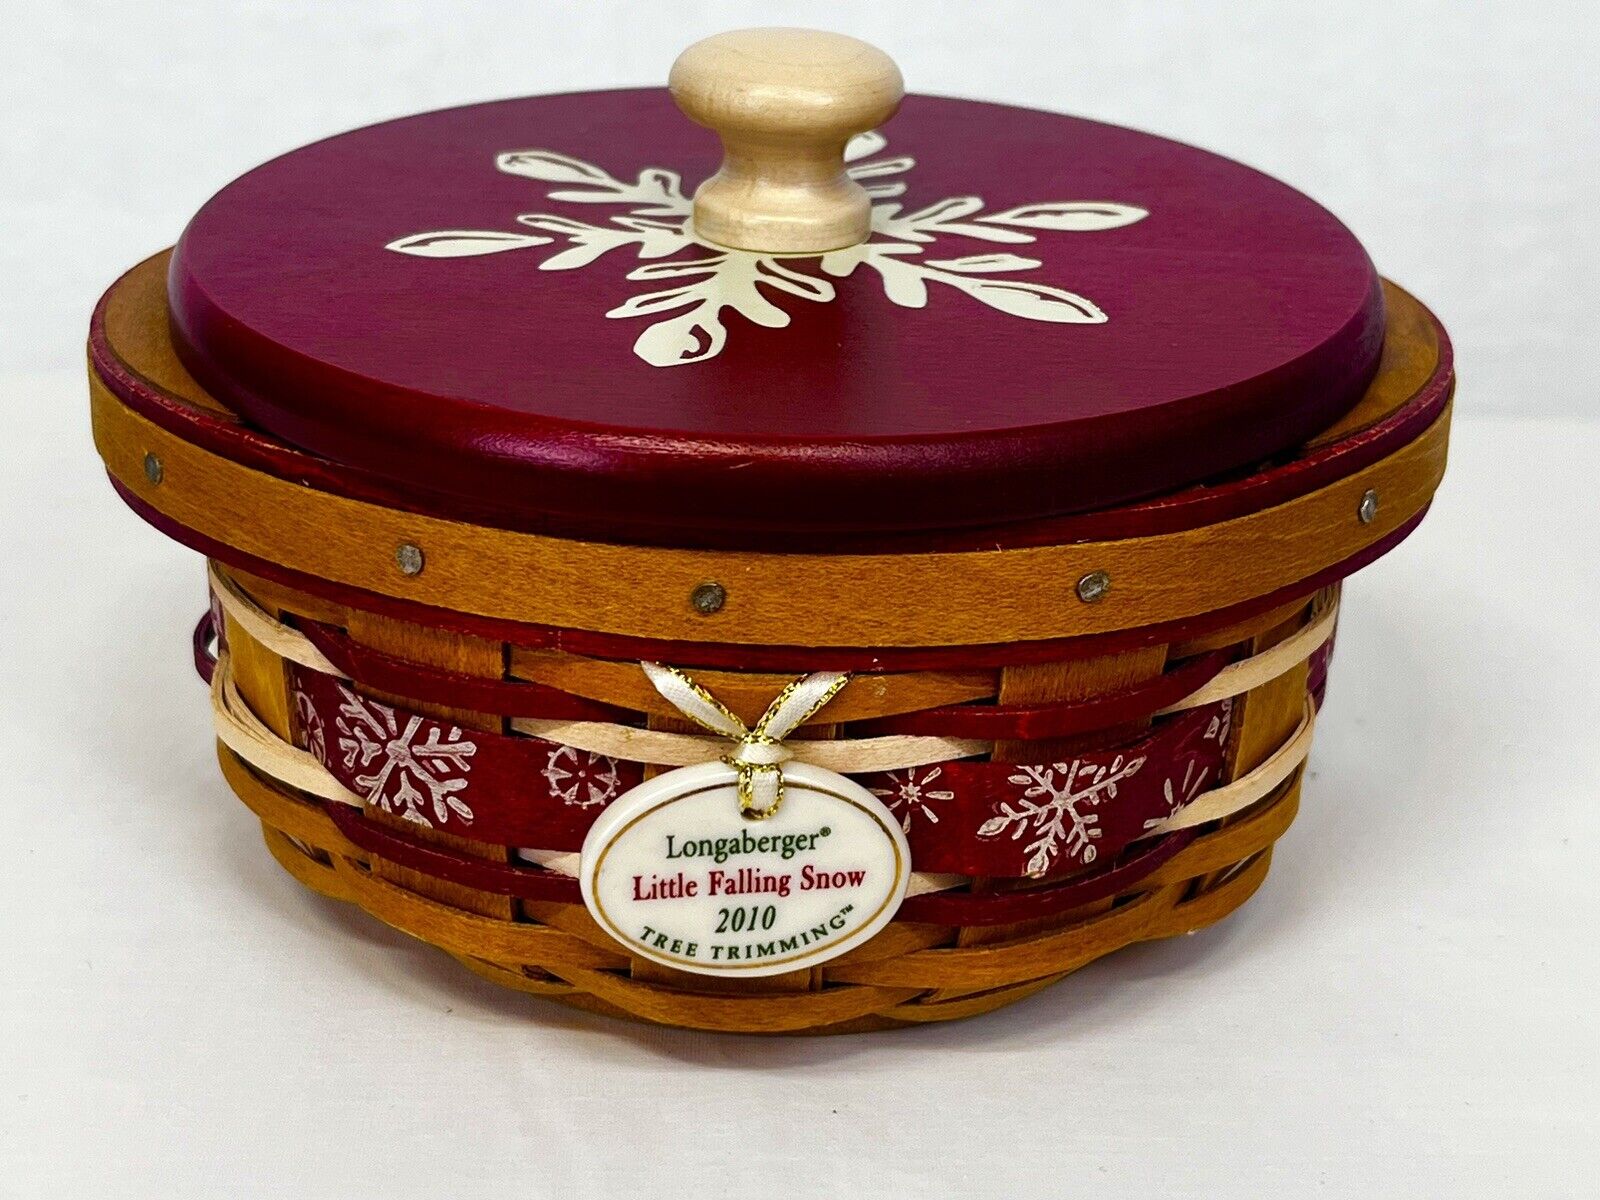 Longaberger 2010 Tree Trimming - Little Falling Snow - Red With Lid & Liners